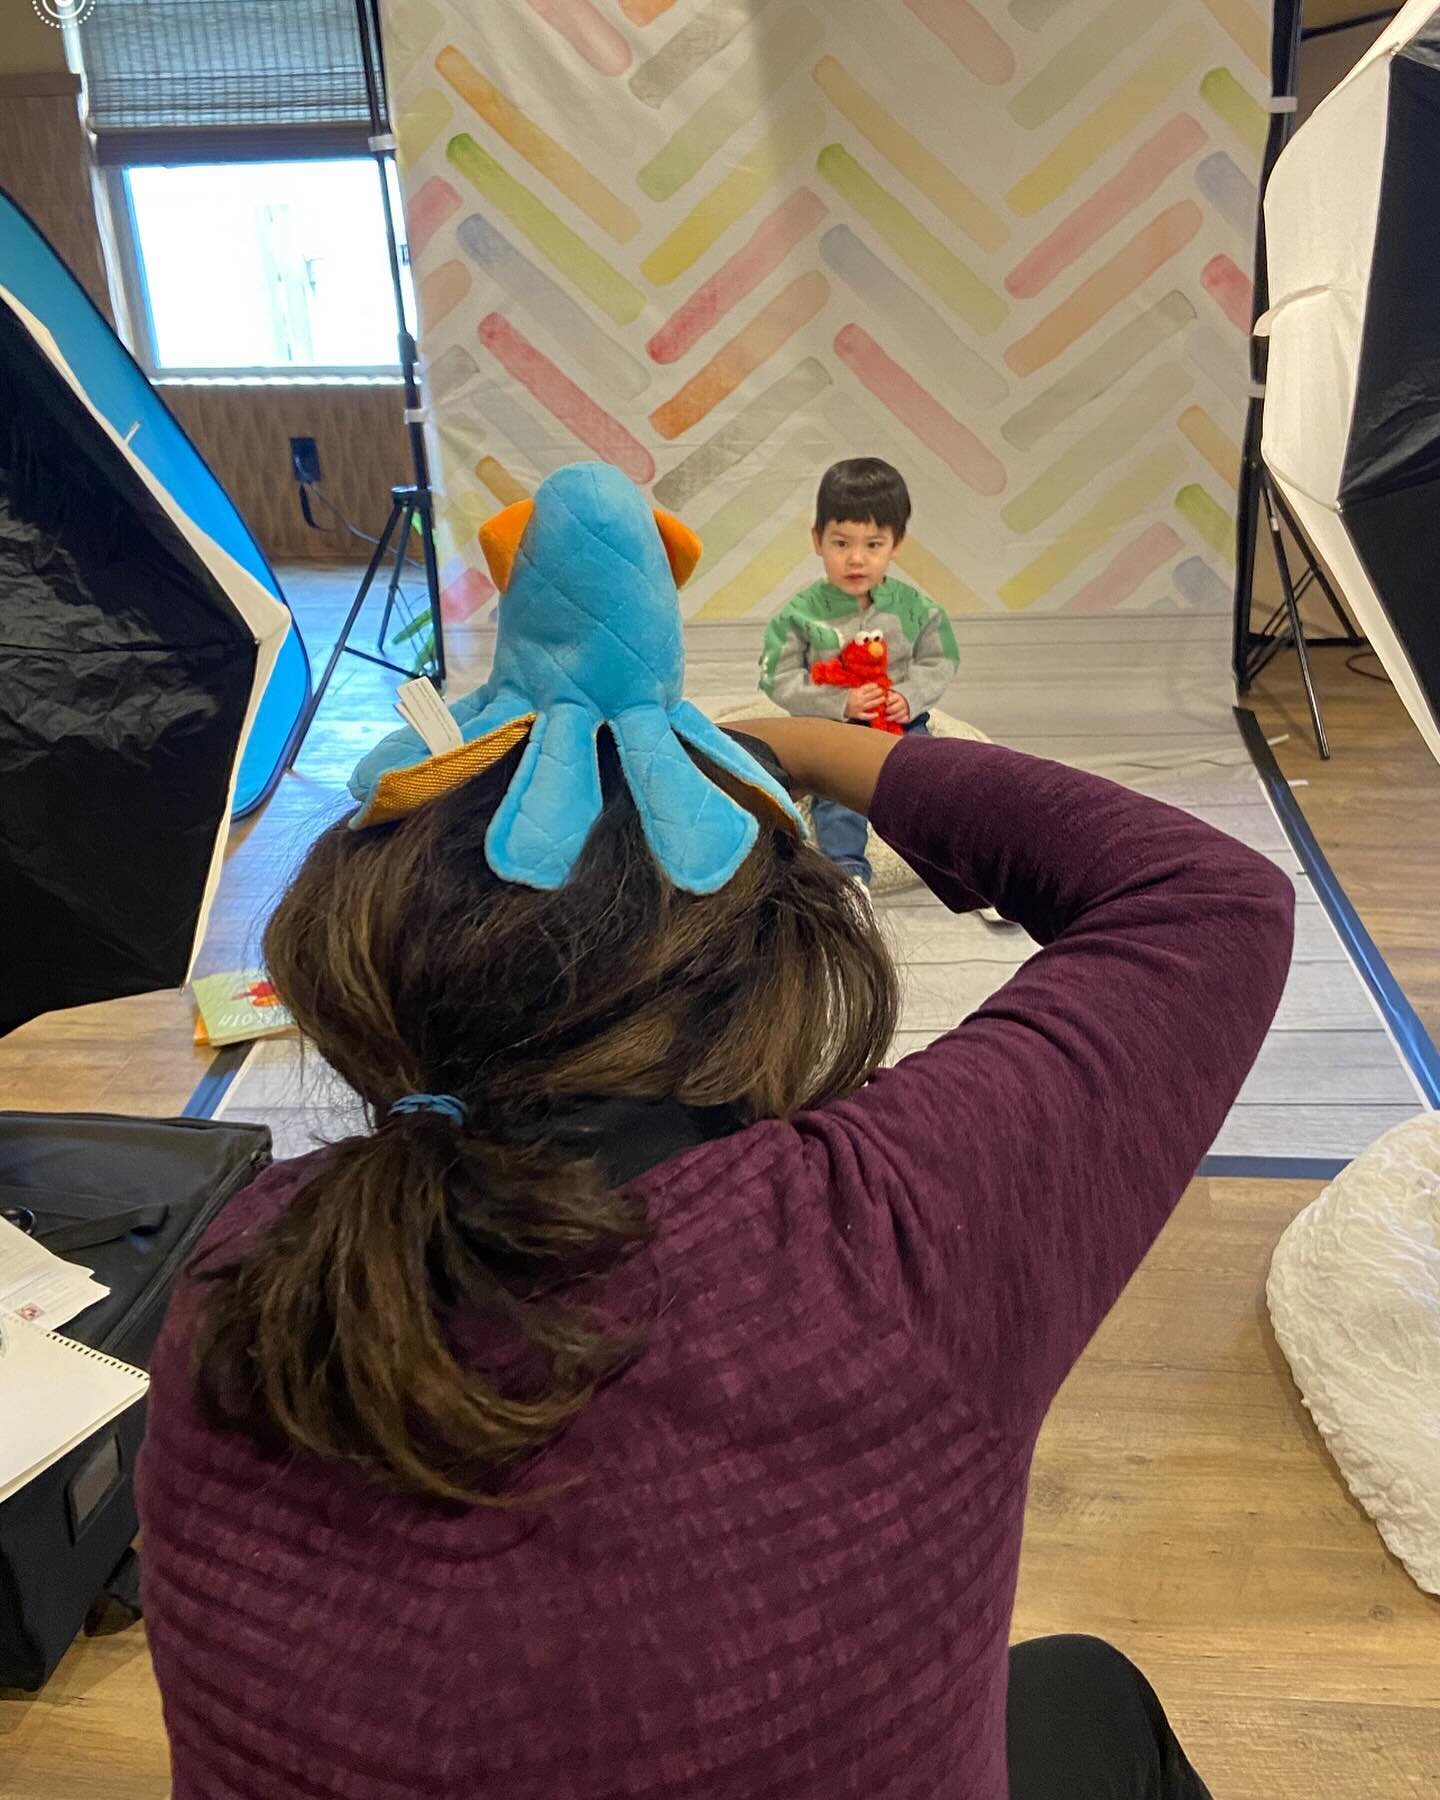 Picture day, art and fun with friends! #foundationsprepschool #fps #foundationsprep #penguinclass #tinytoddlers #funandlearning #earlychildhood #bloomfieldnj #allsmiles